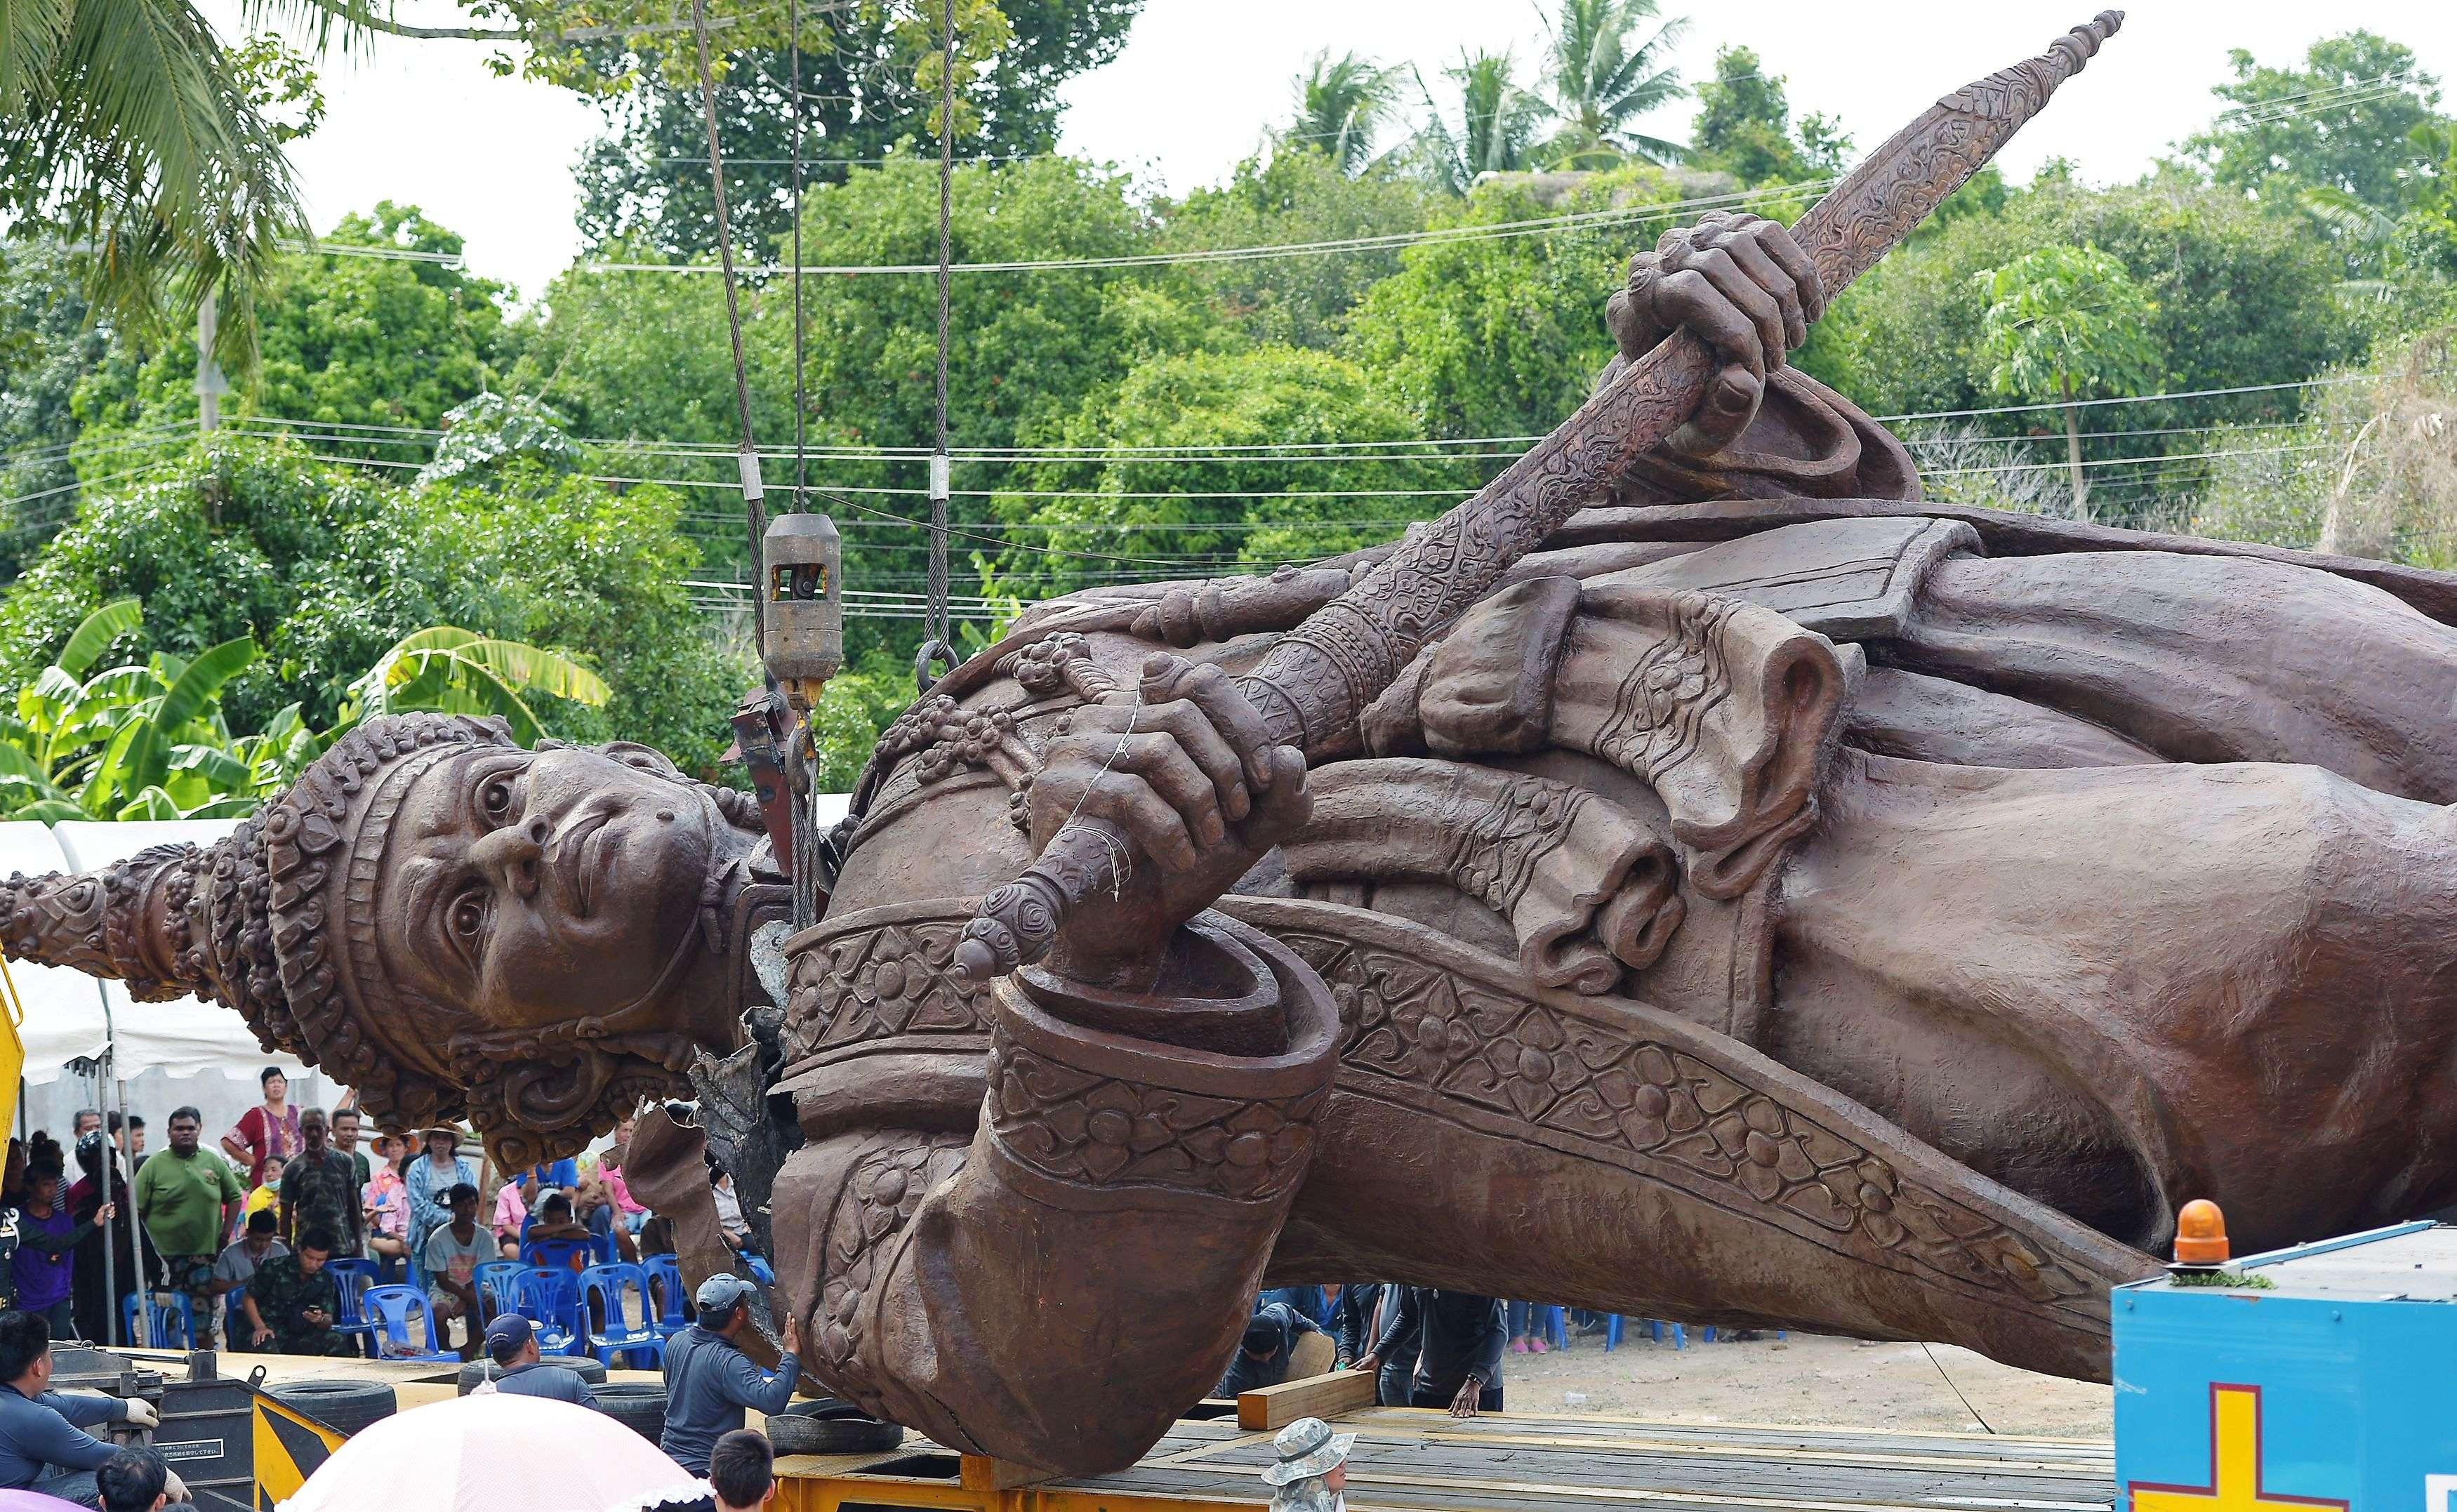 Thai workers and soldiers prepare a statue of King Narai of Ayutthaya for transport from a casting factory in Lopburi province. The statue will be part of an installation at a park called Ratchapakdi in Hua Hin to honour past Thai monarchs. The park, under construction by the Thai army, honour's the country's royal institution and is located at a military compound near the Klai Kangwon Palace. (AFP/Pornchai Kittiwongsakul) 